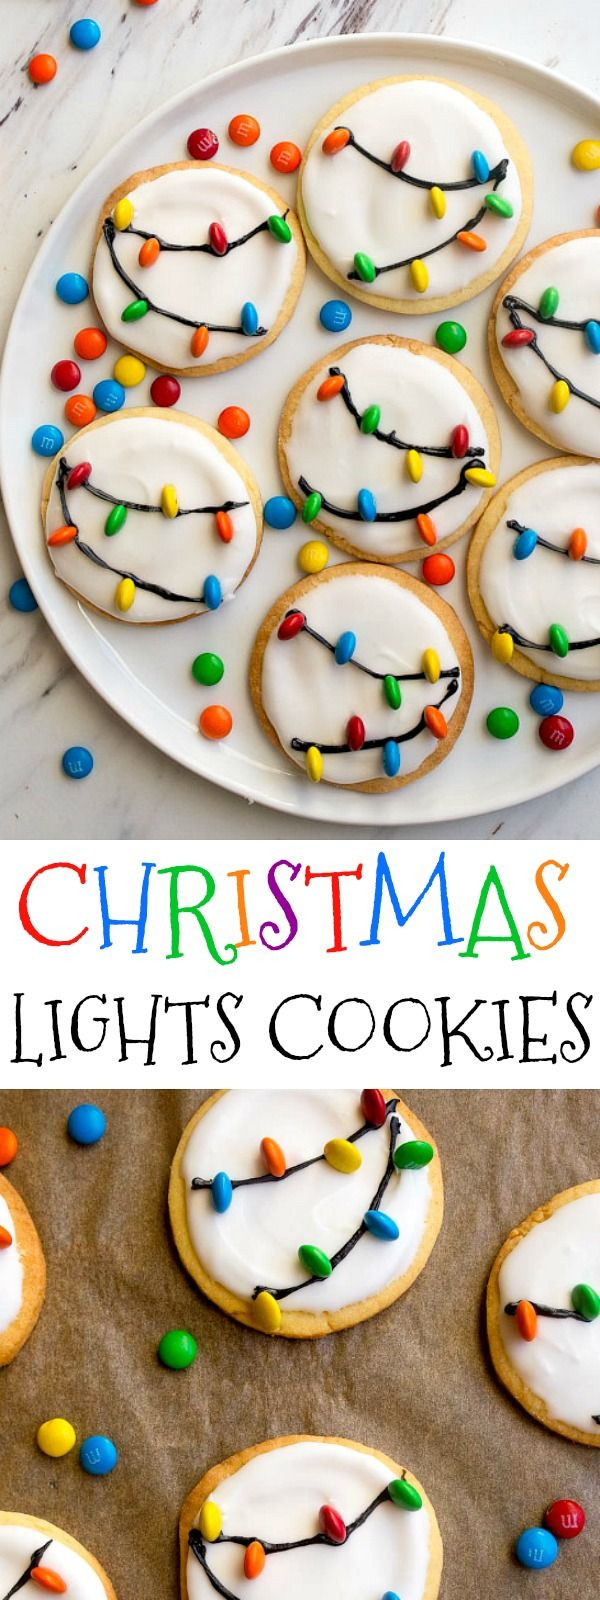 America'S Test Kitchen Christmas Cookies
 best Bloggers Best Baking Recipes images on